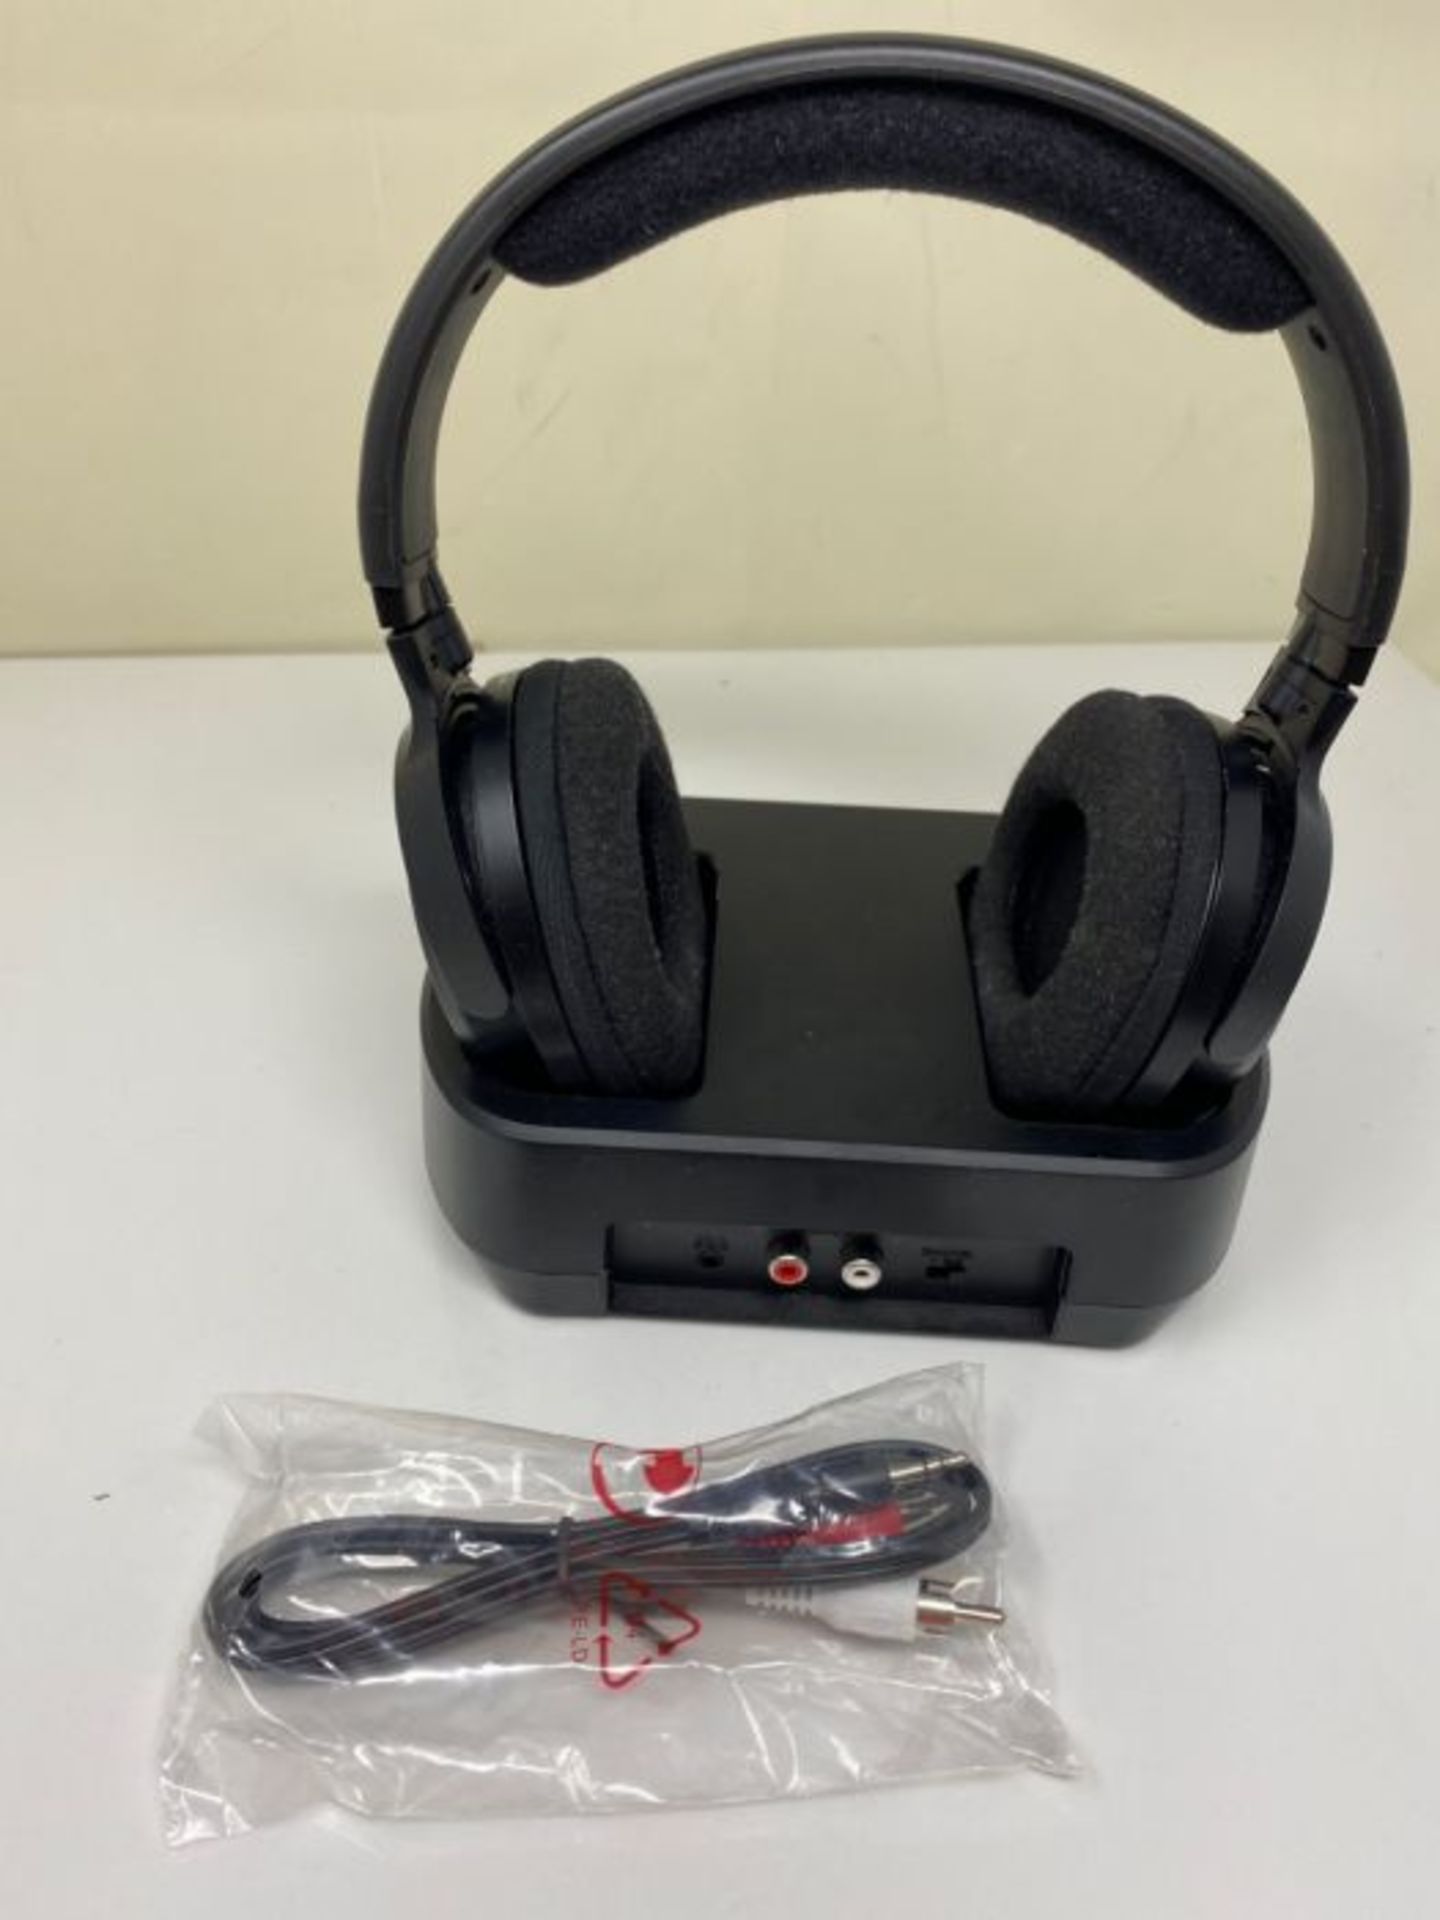 Thomson WHP 3001 Wireless Headphones for Portable Music Players 863 MHz, Black - Image 3 of 3